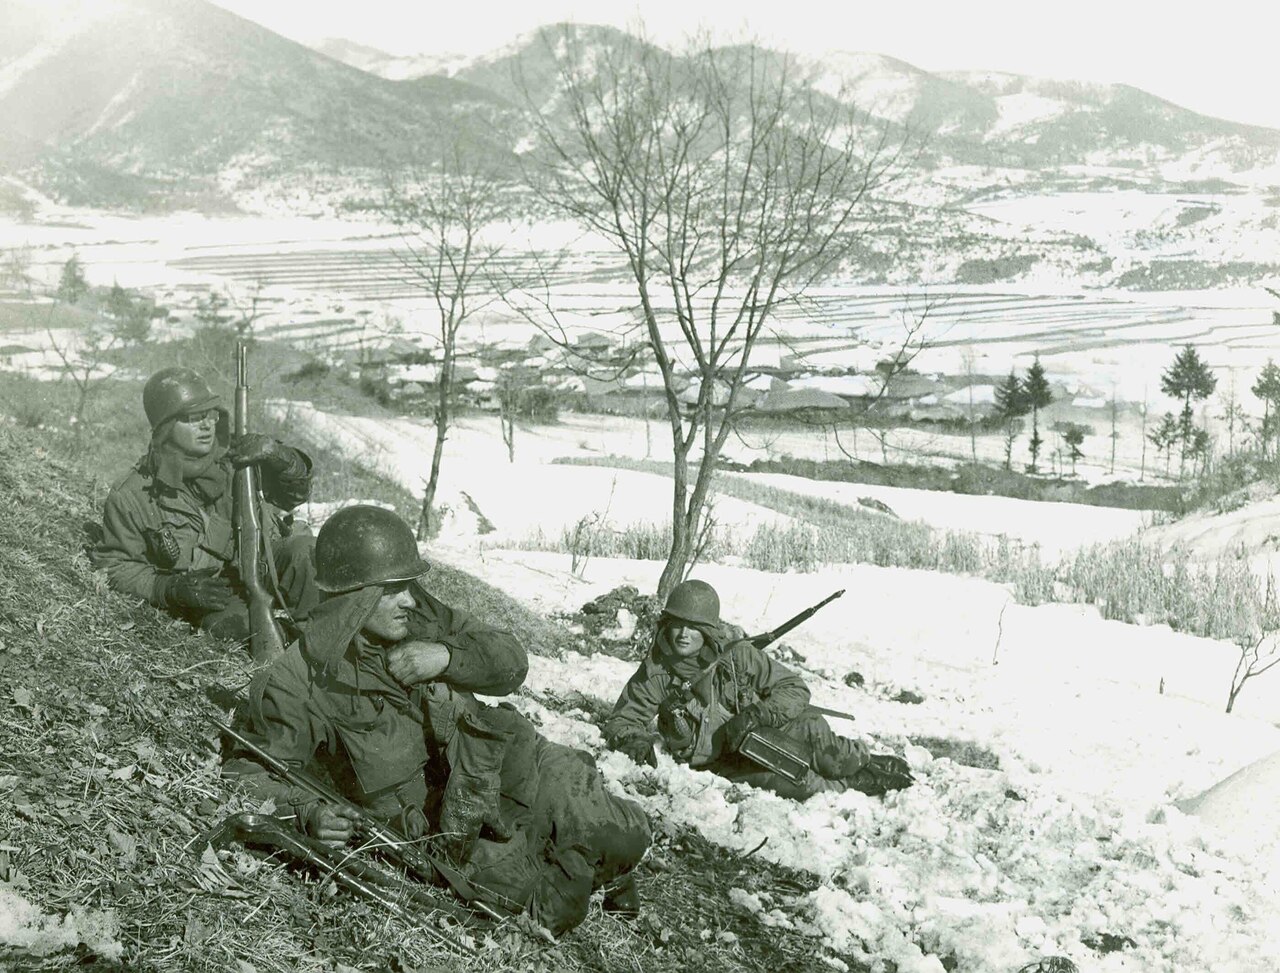 Three men bundled in winter gear sit on the side of a snow-covered hill.